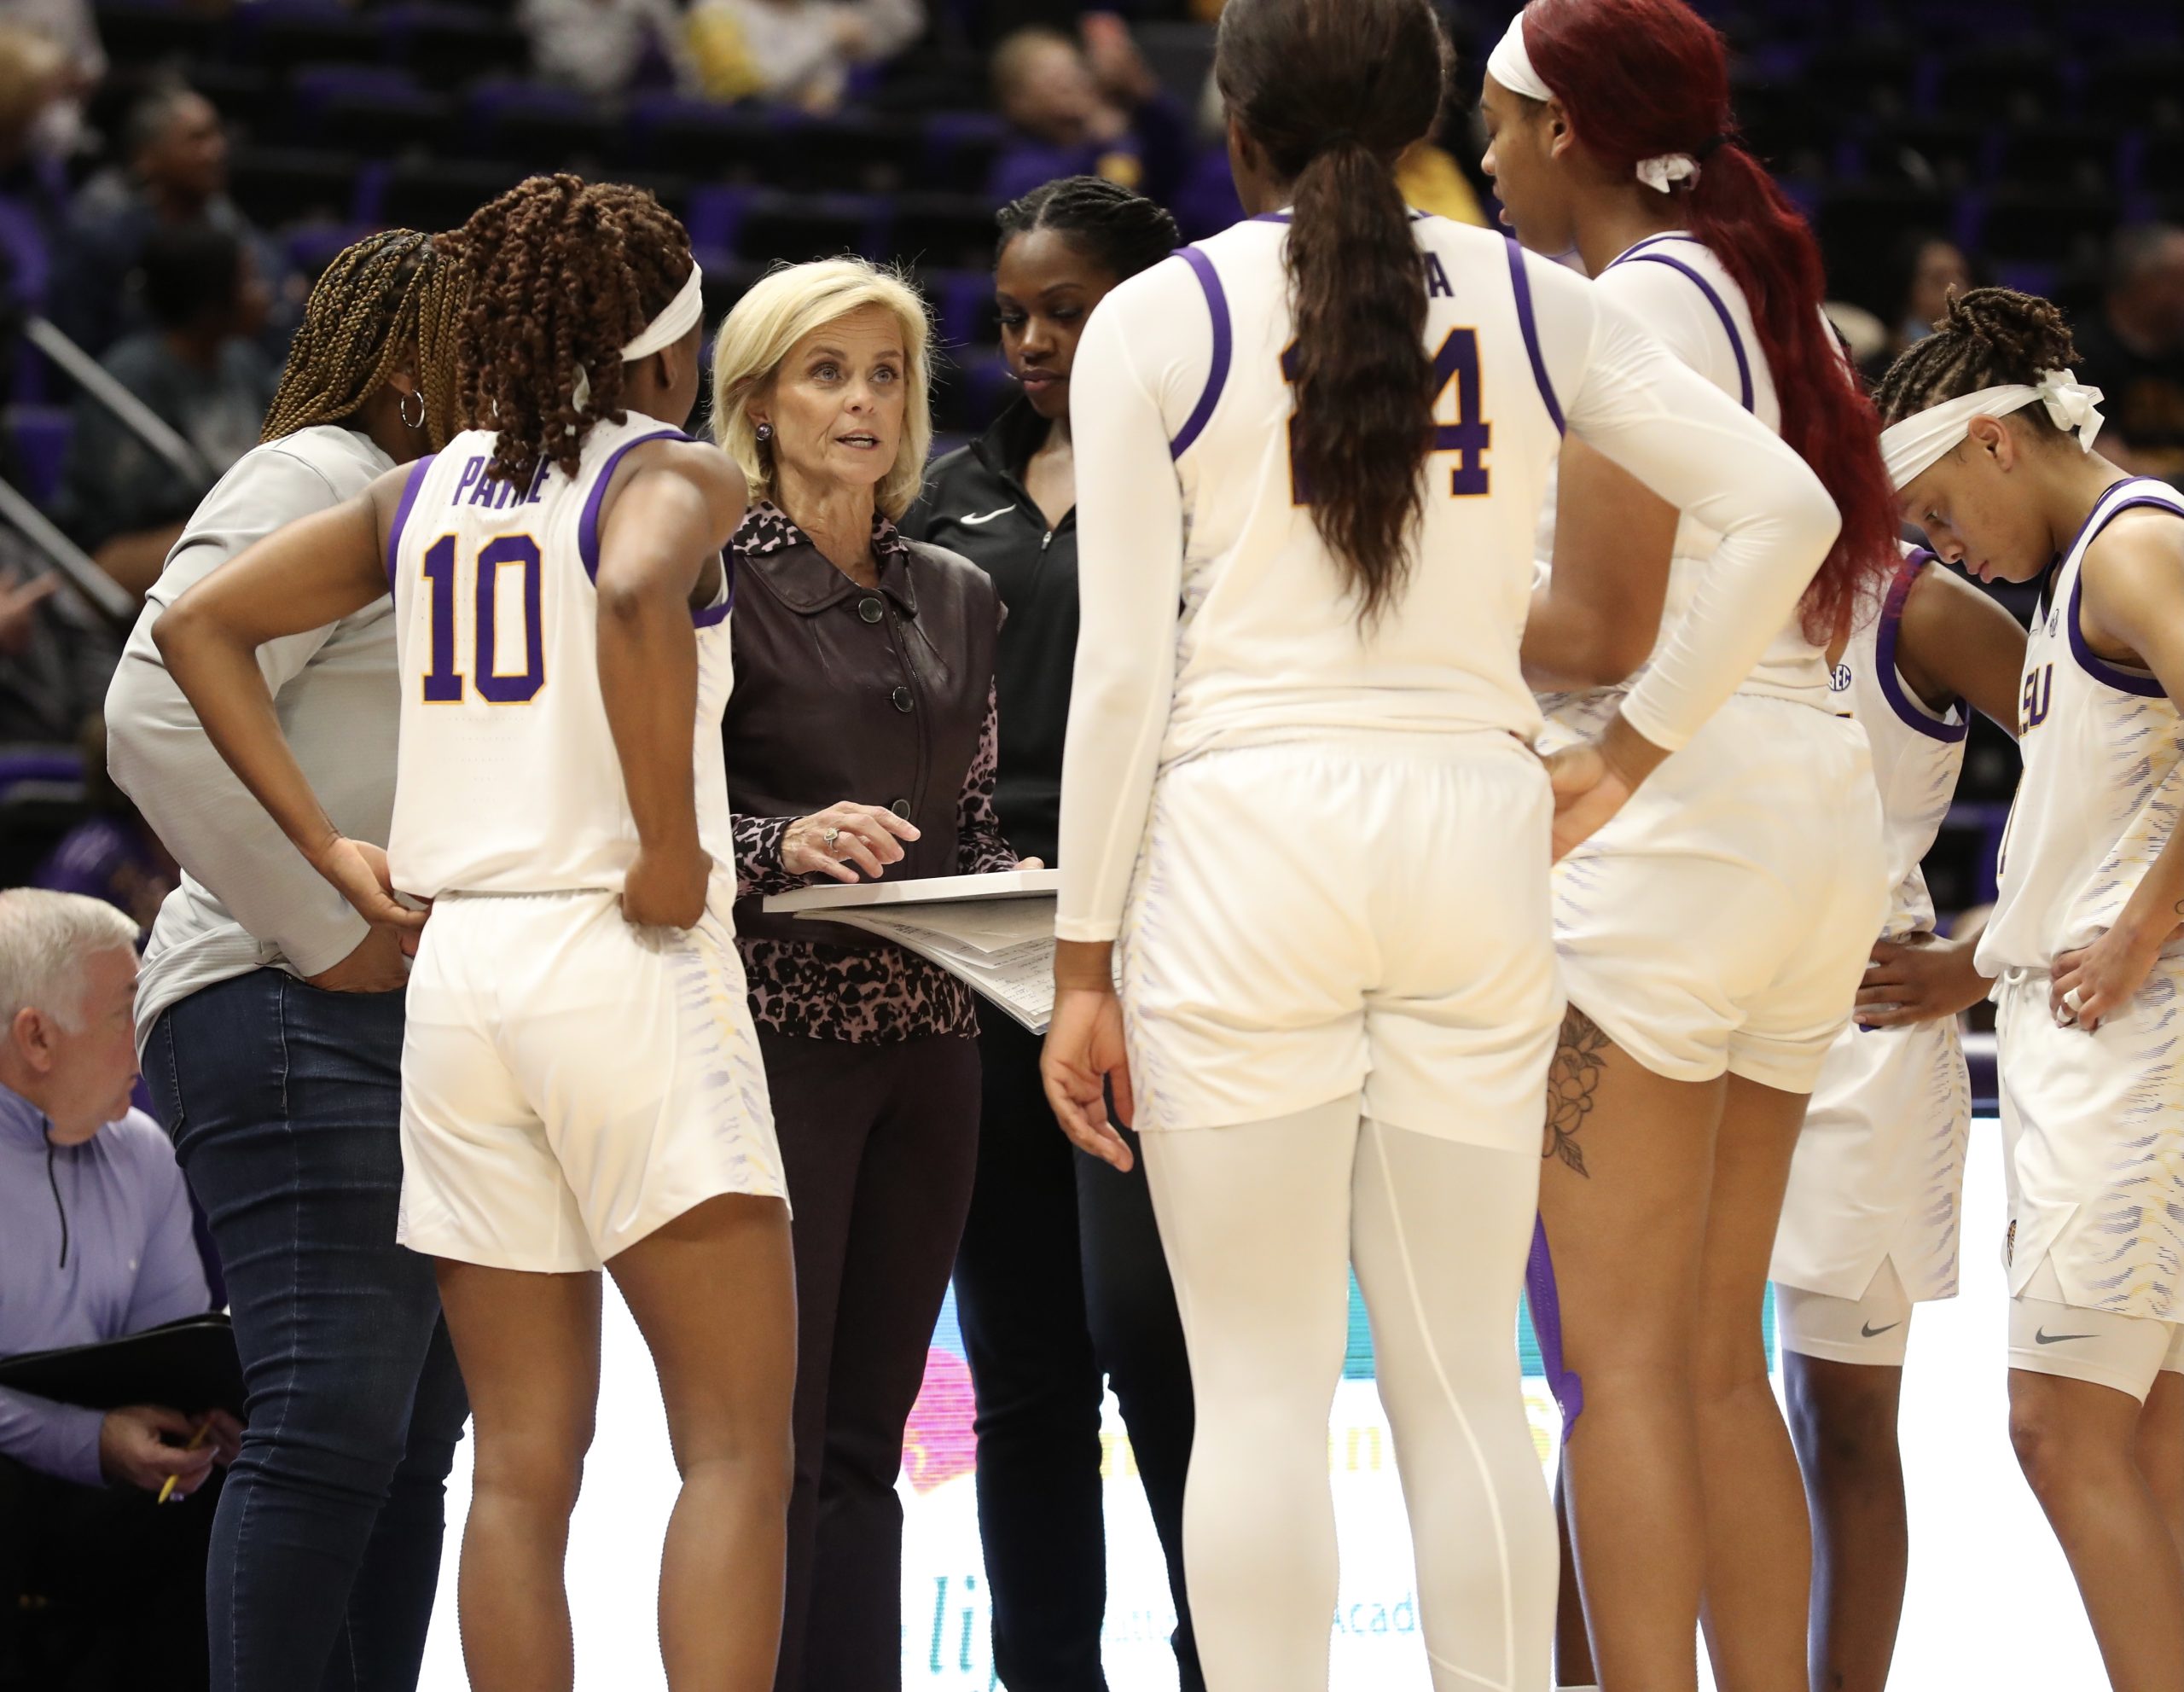 Angel Reese is back . . . and more Full Video of LSU women's coach